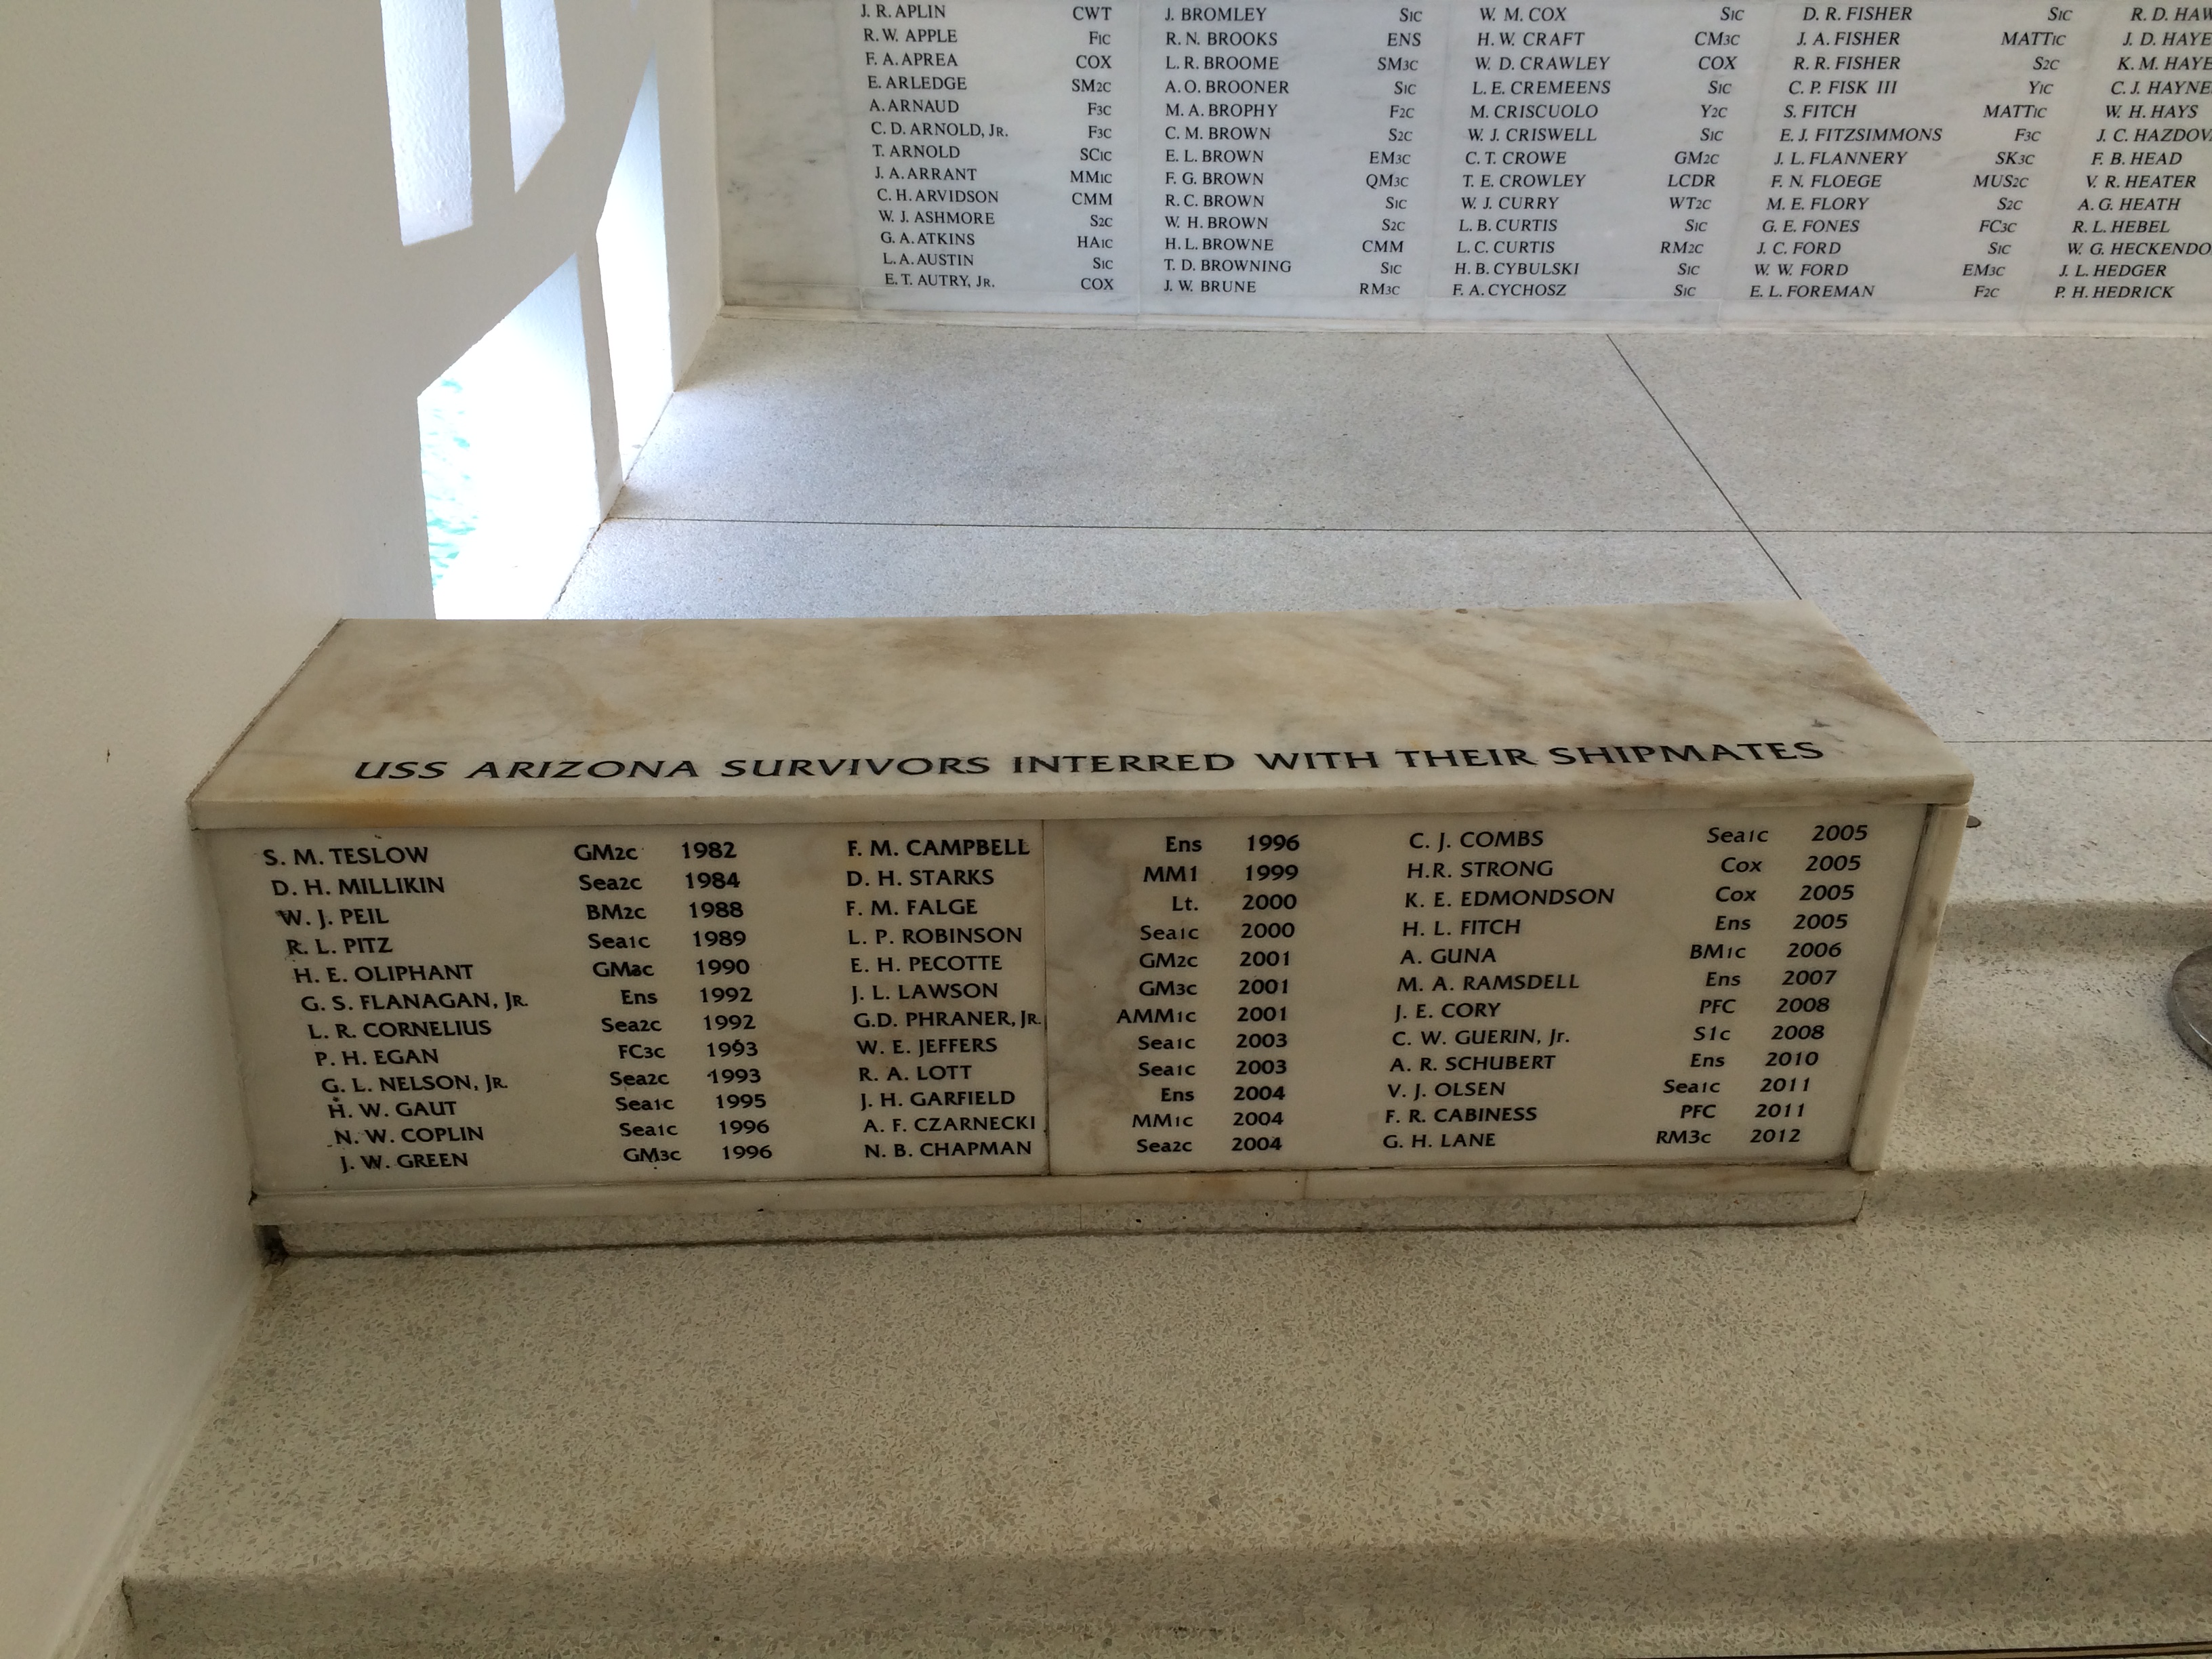 Names of USS Arizona Survivors Interred after the Pearl Harbor Attack